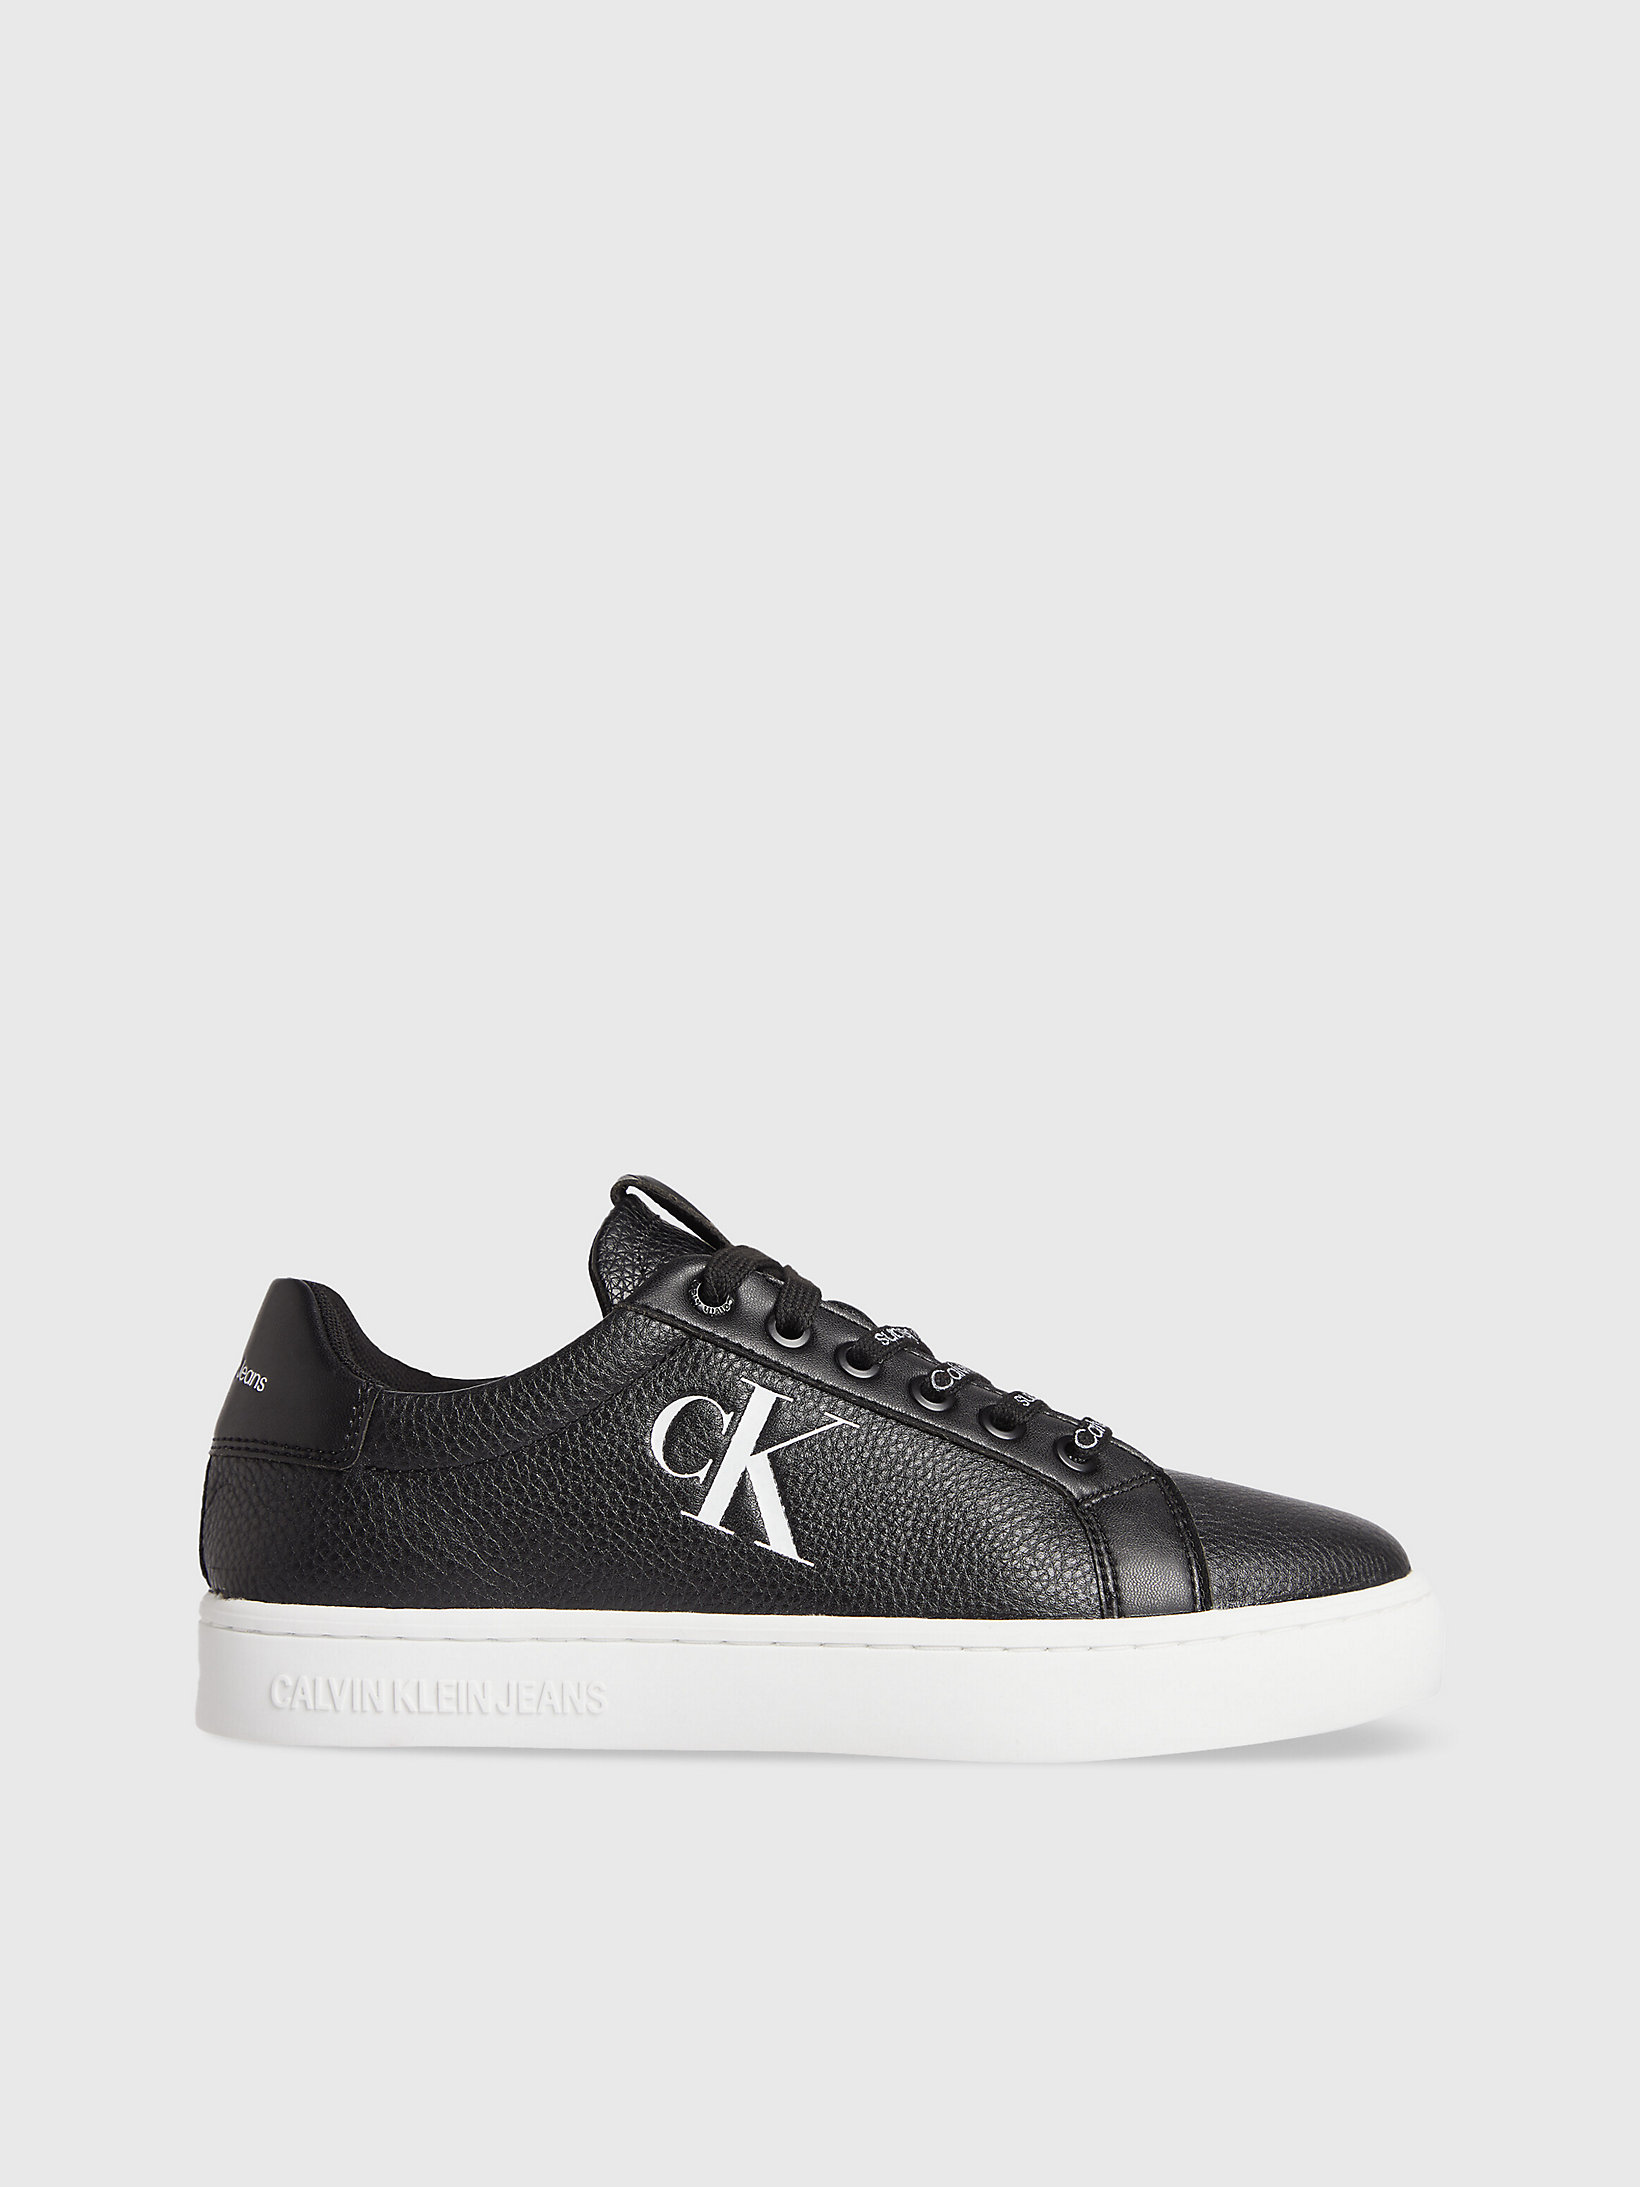 Black/white Leather Trainers undefined women Calvin Klein